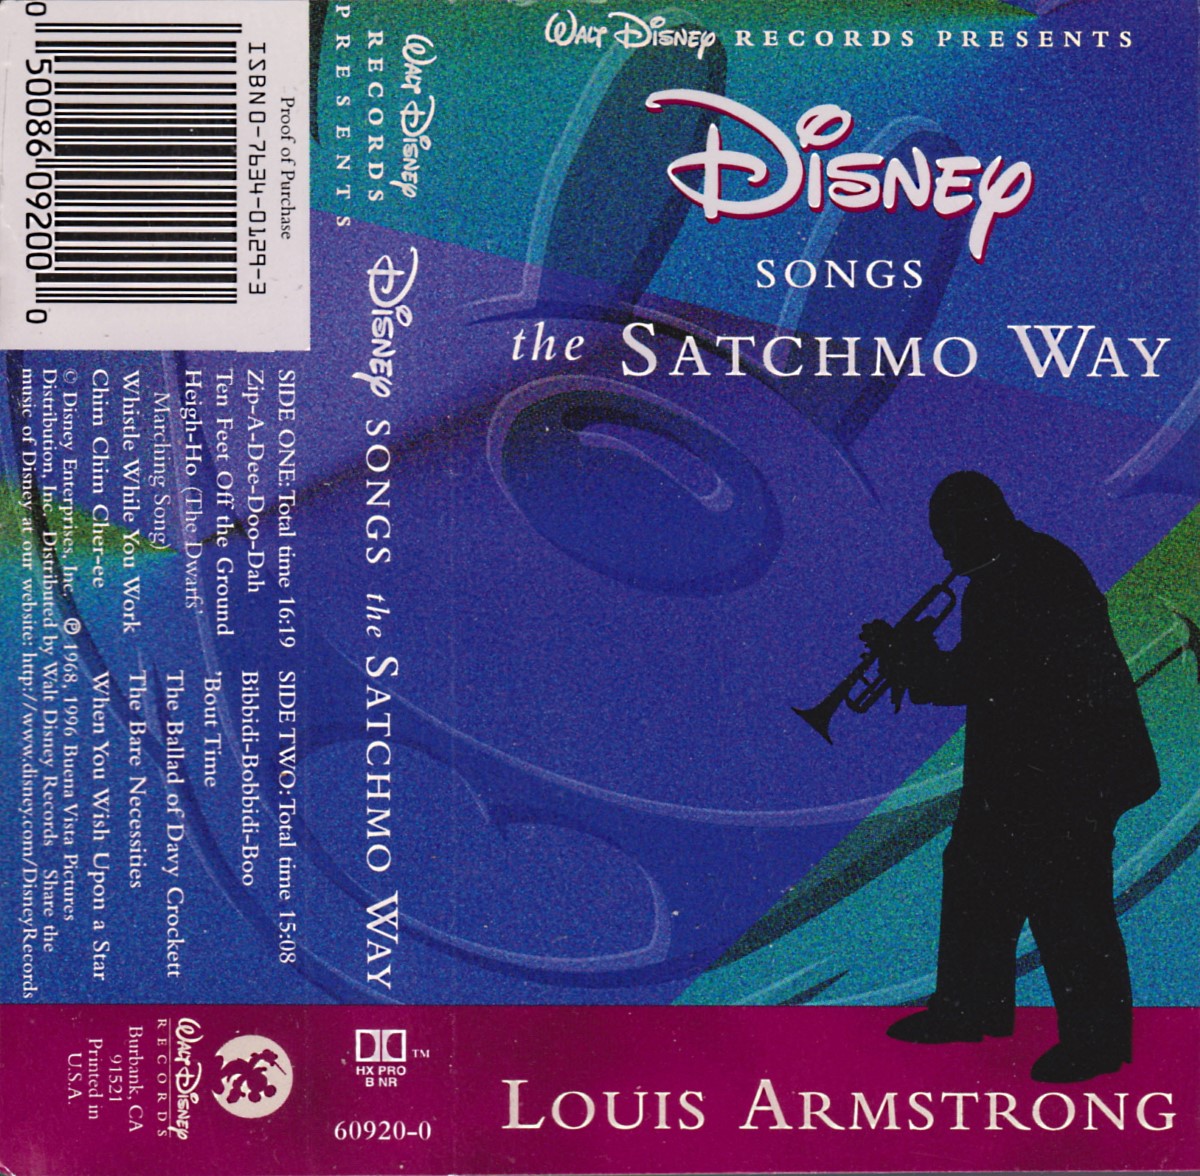 Louis Armstrong - Disney Songs The Satchmo Way (1968)